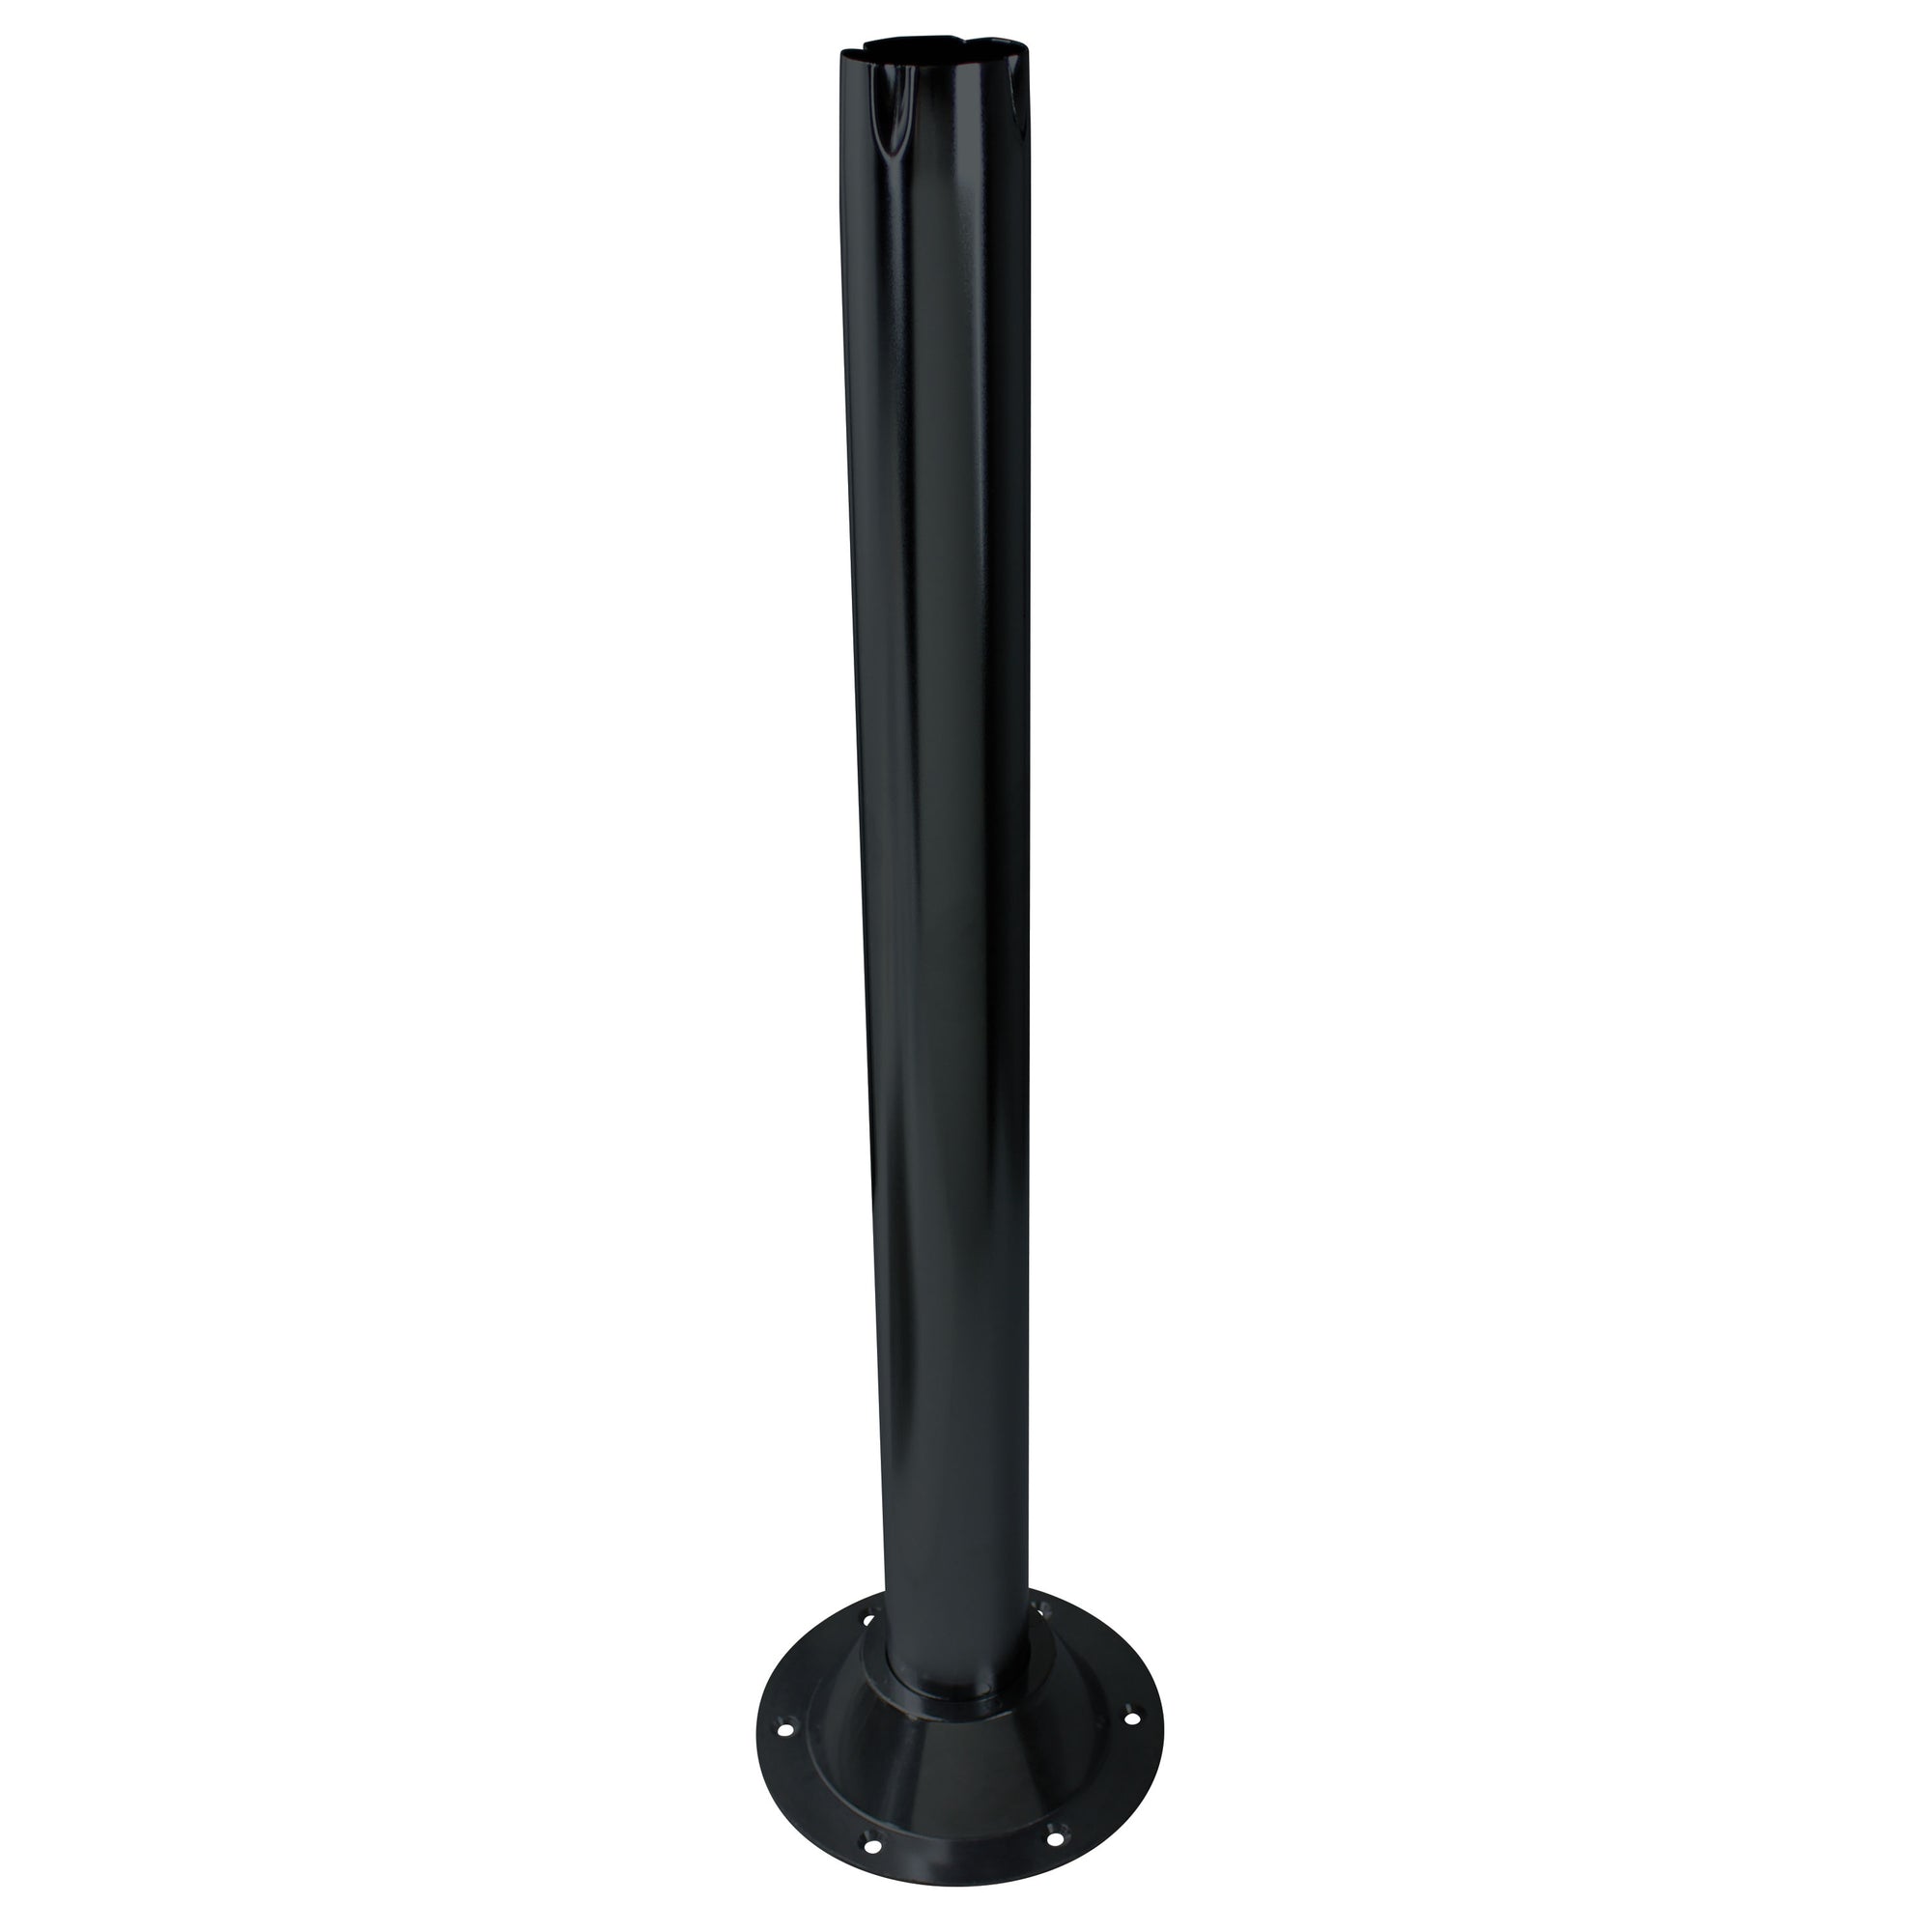 Russell Products MA-939B Black Pedestal Table Leg - 27-1/2"